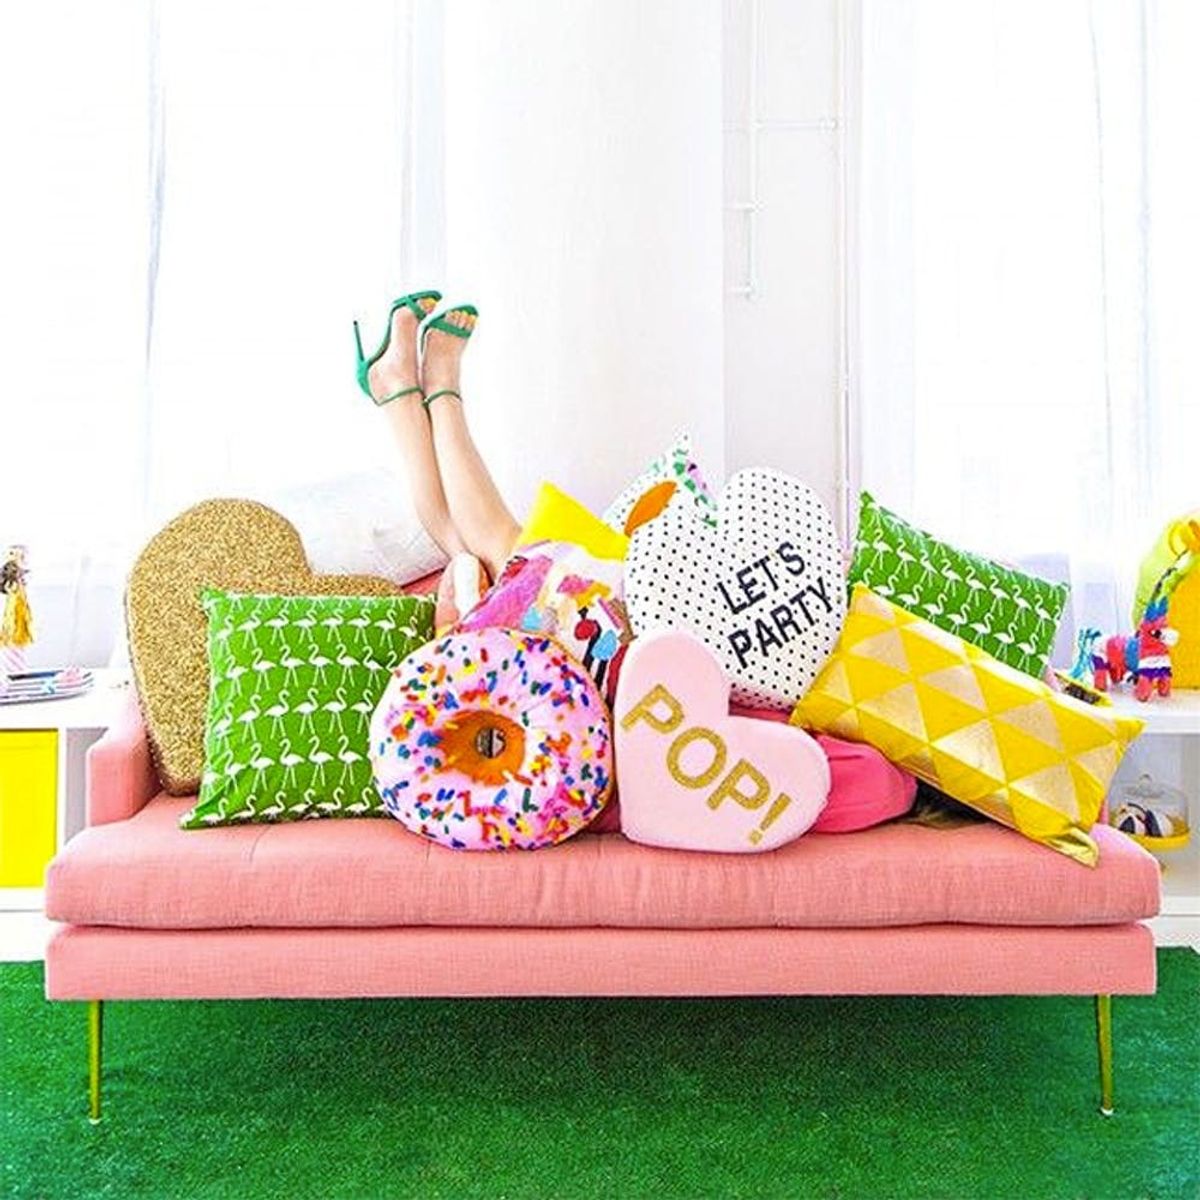 7 Bold Ways to Style Your Colorful Couch